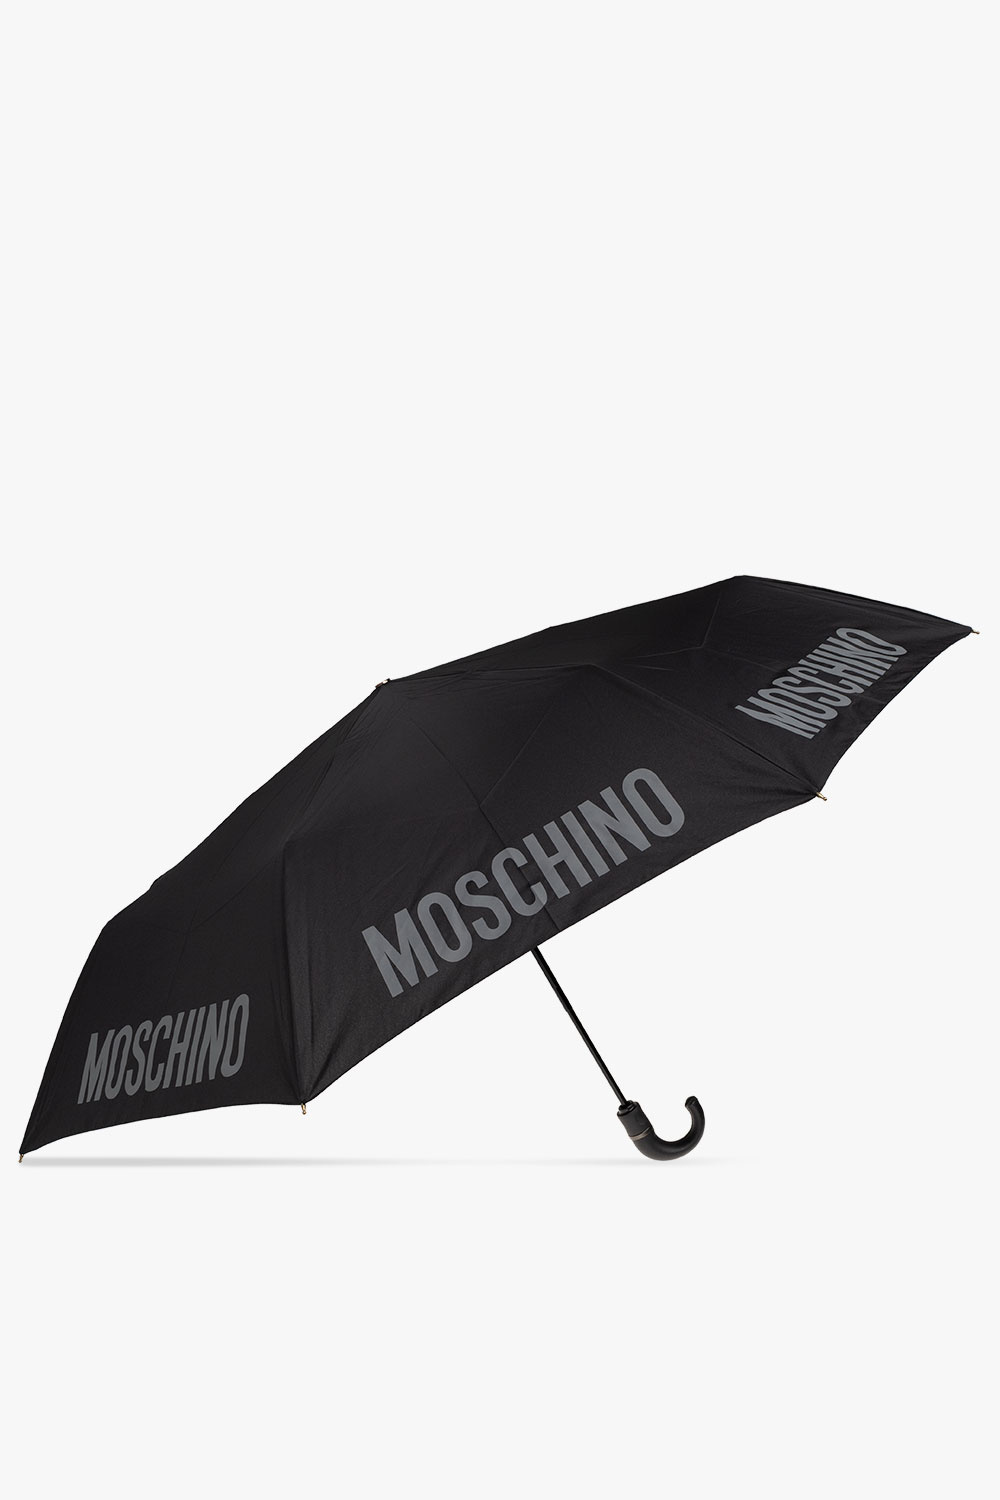 Moschino Download the latest version of the app